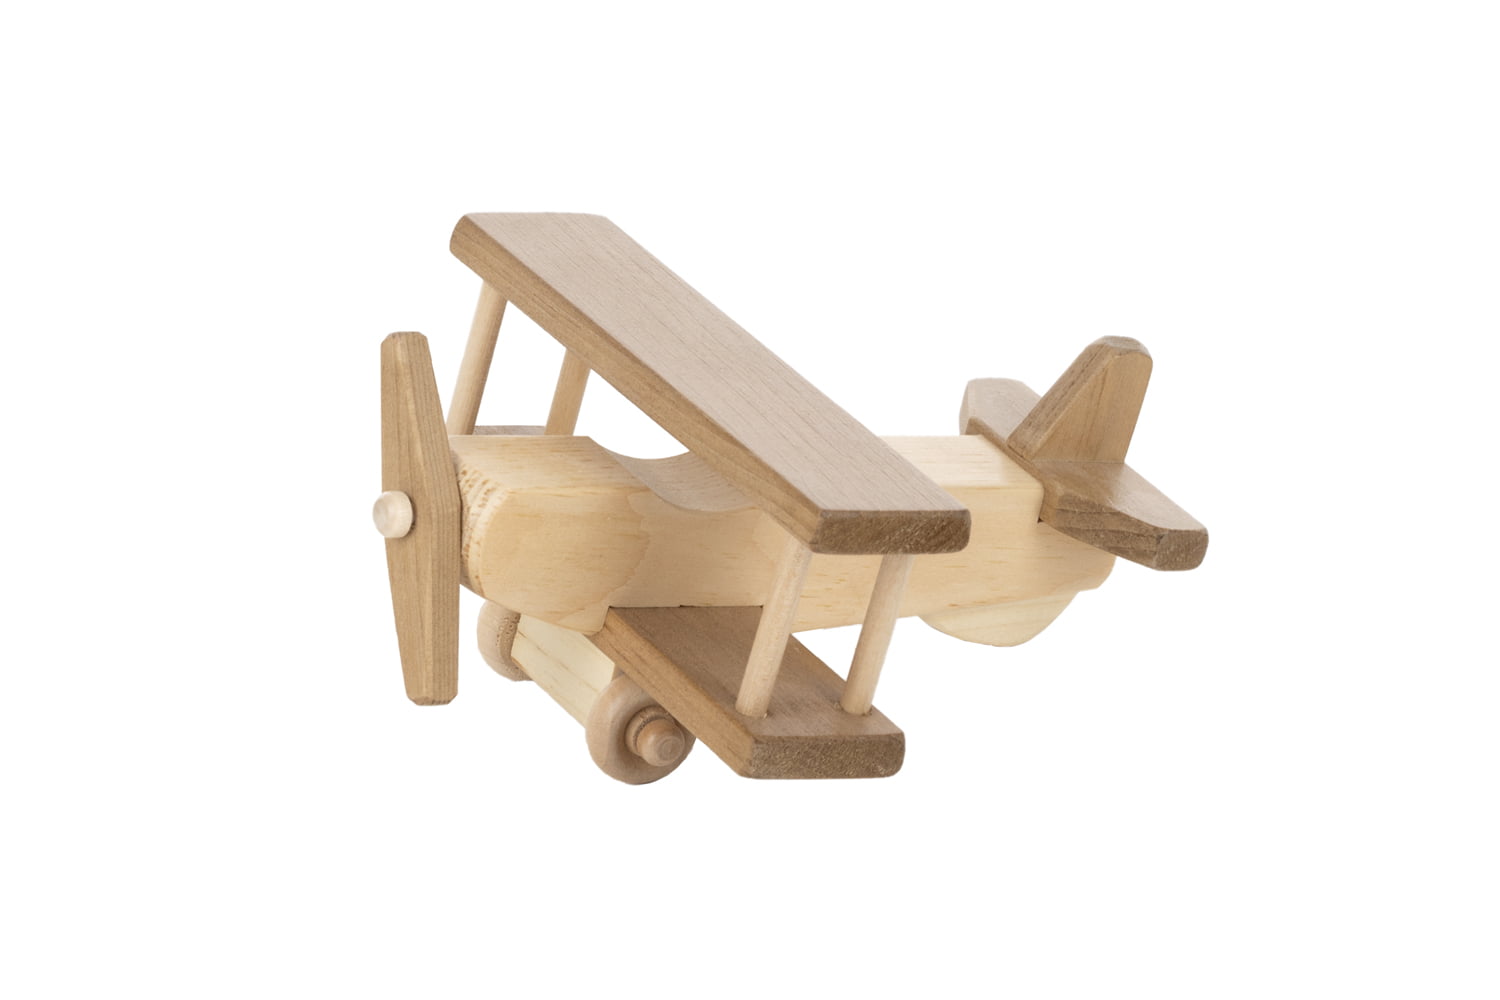 Child’s Small Wooden Maple Airplane – Amish Crafted